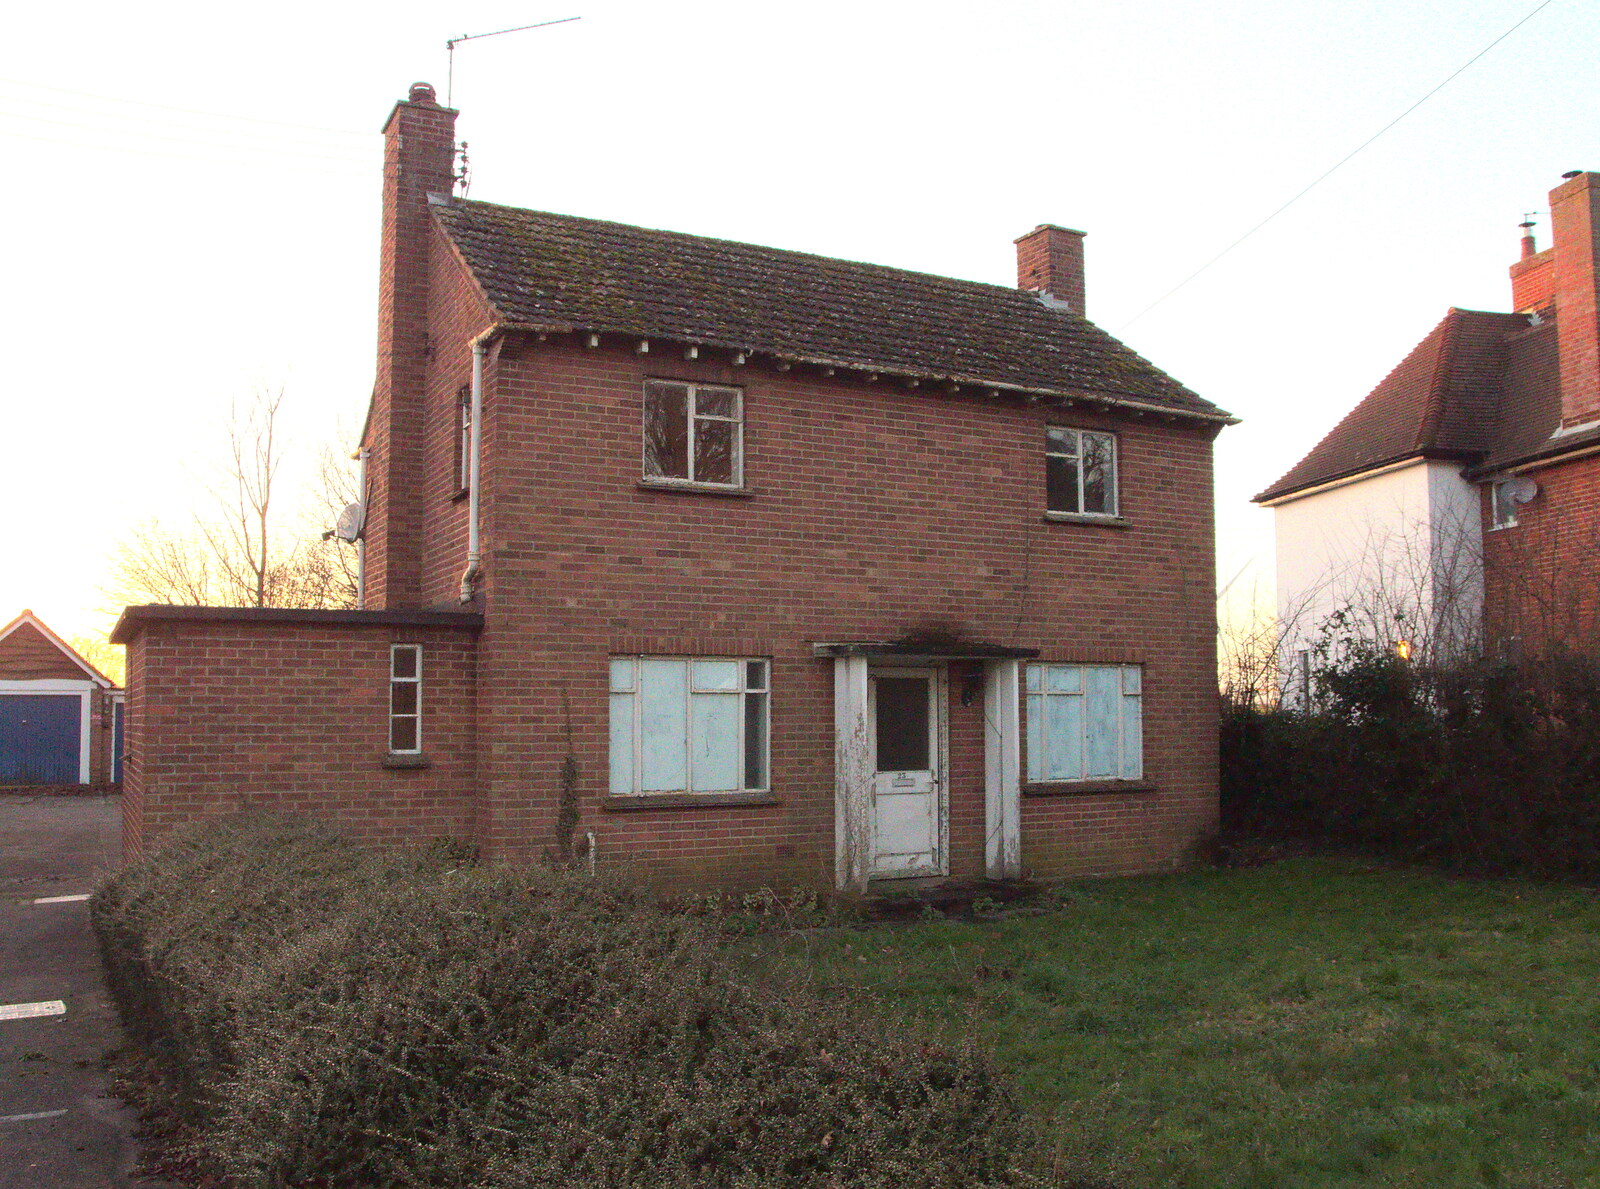 The old officer's quarters next to the cop shop from Closing Down: A Late January Miscellany, Diss, Norfolk - 31st January 2015